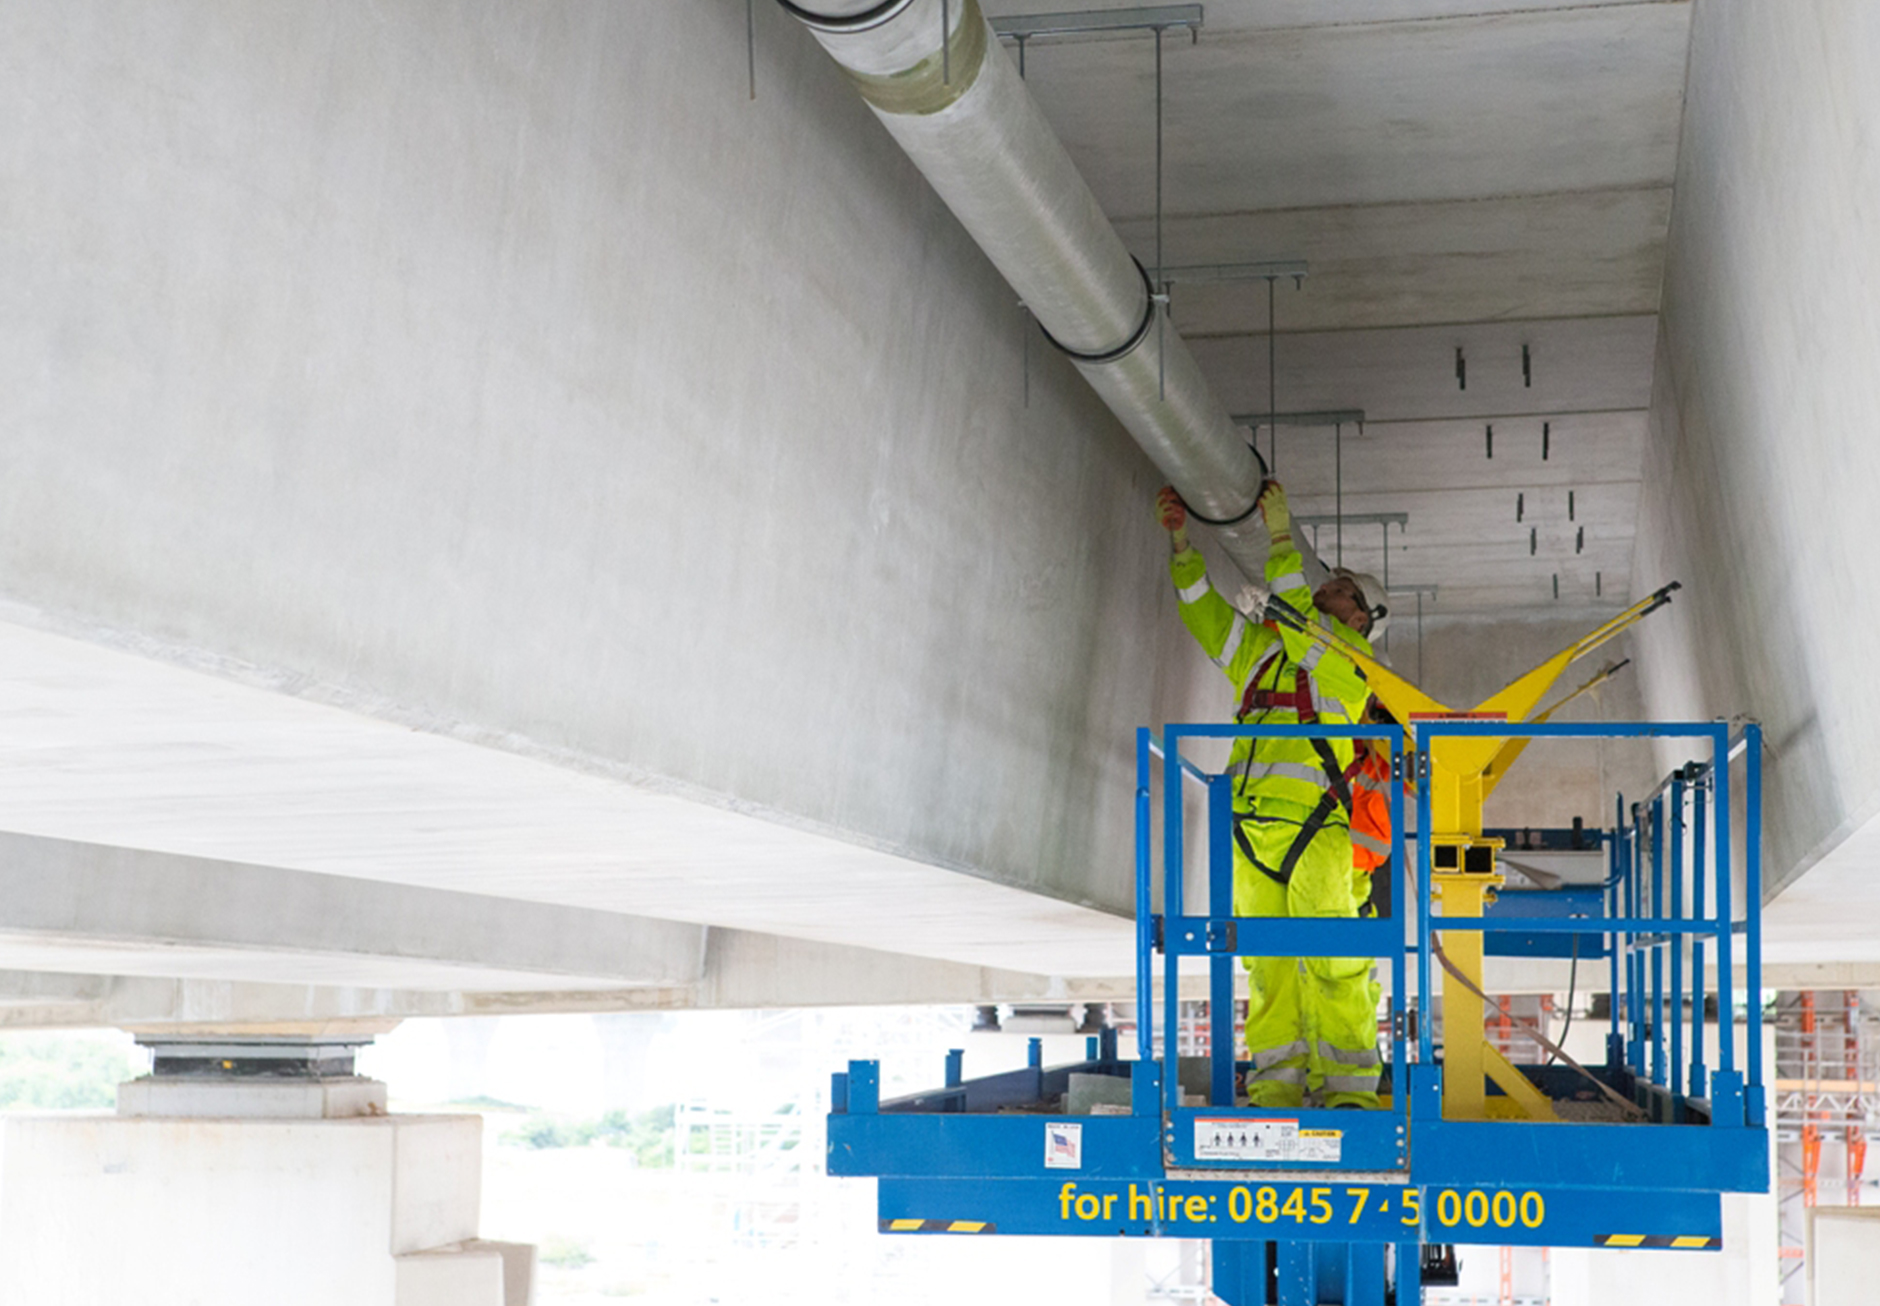 Boom lift at Mersey Gateway project